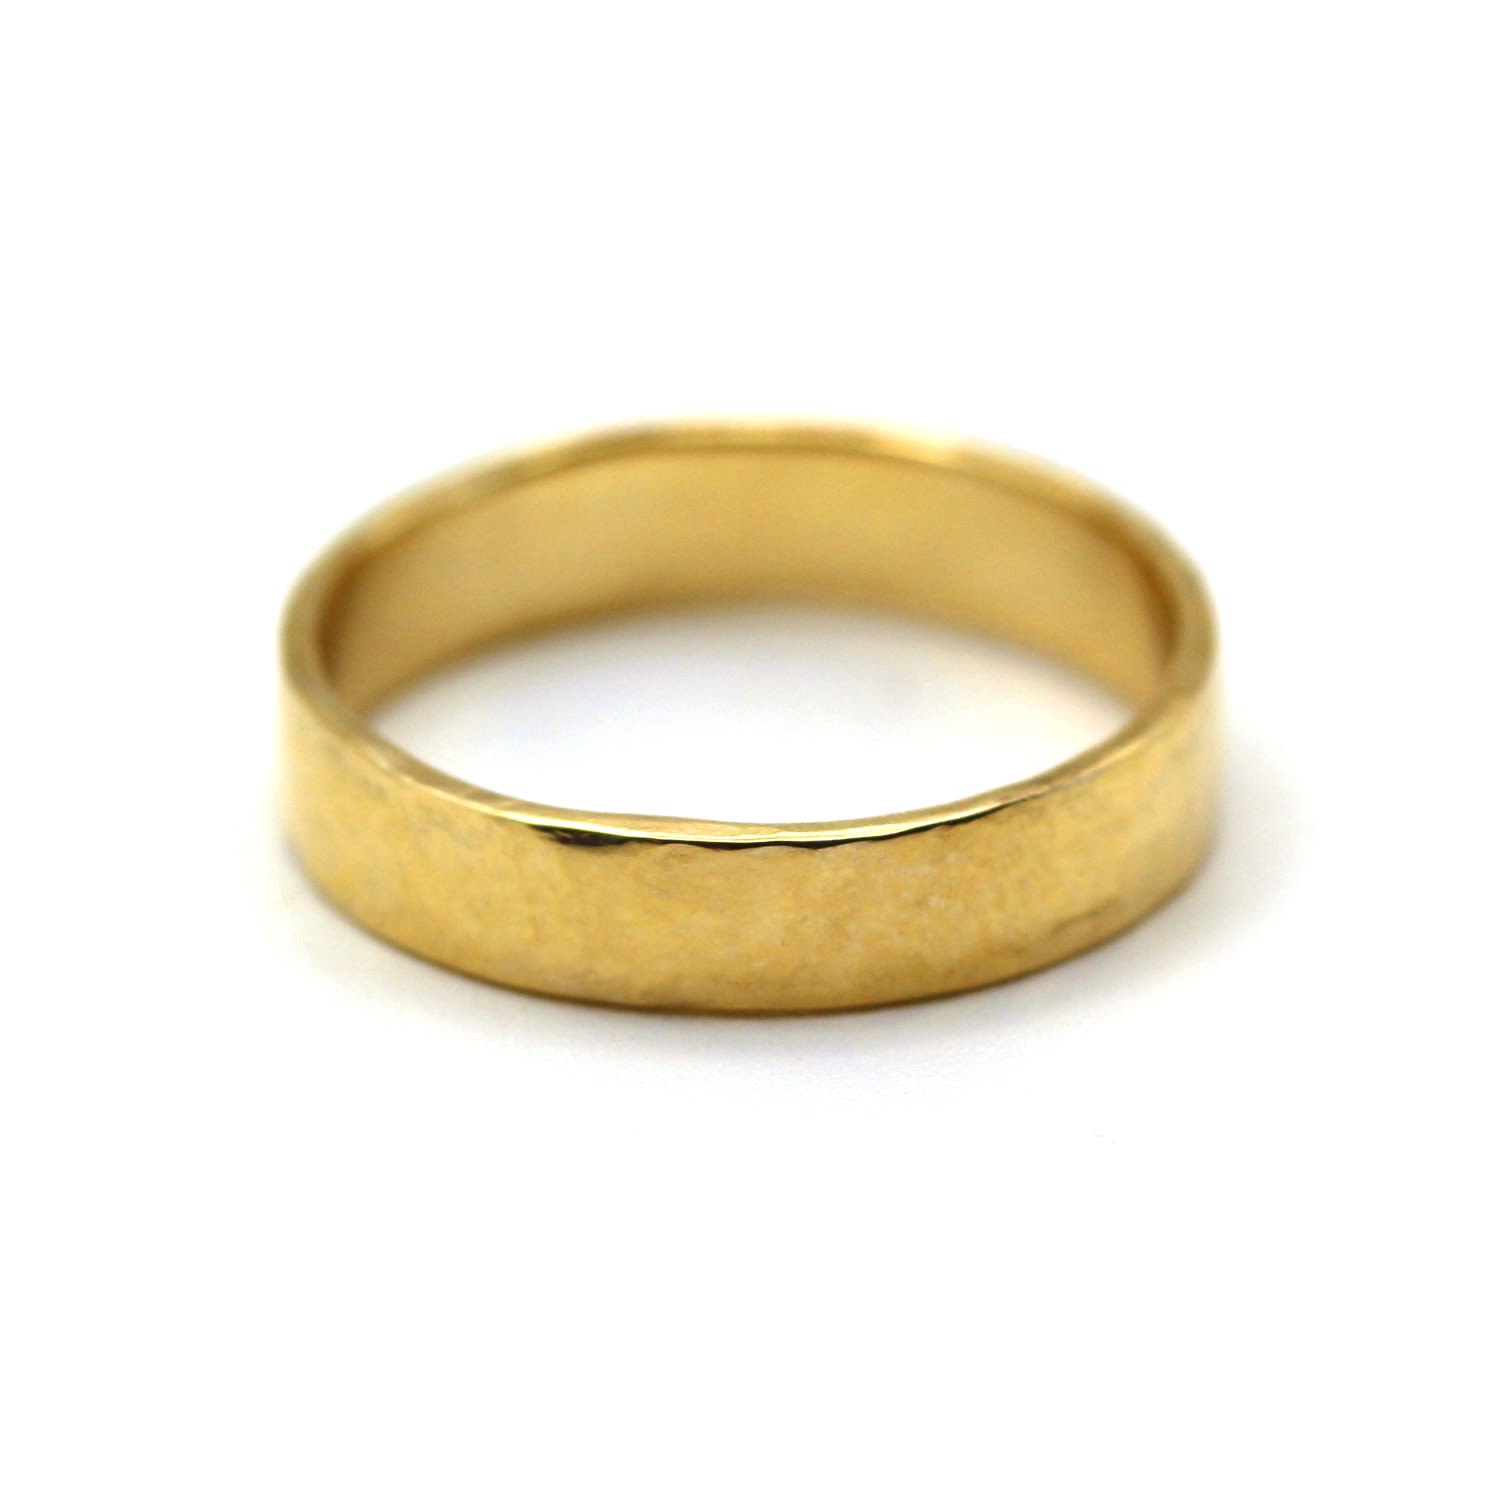 Men's Unique Hammered Texture Yellow Gold Ring Vicstonenyc Fine Jewelry